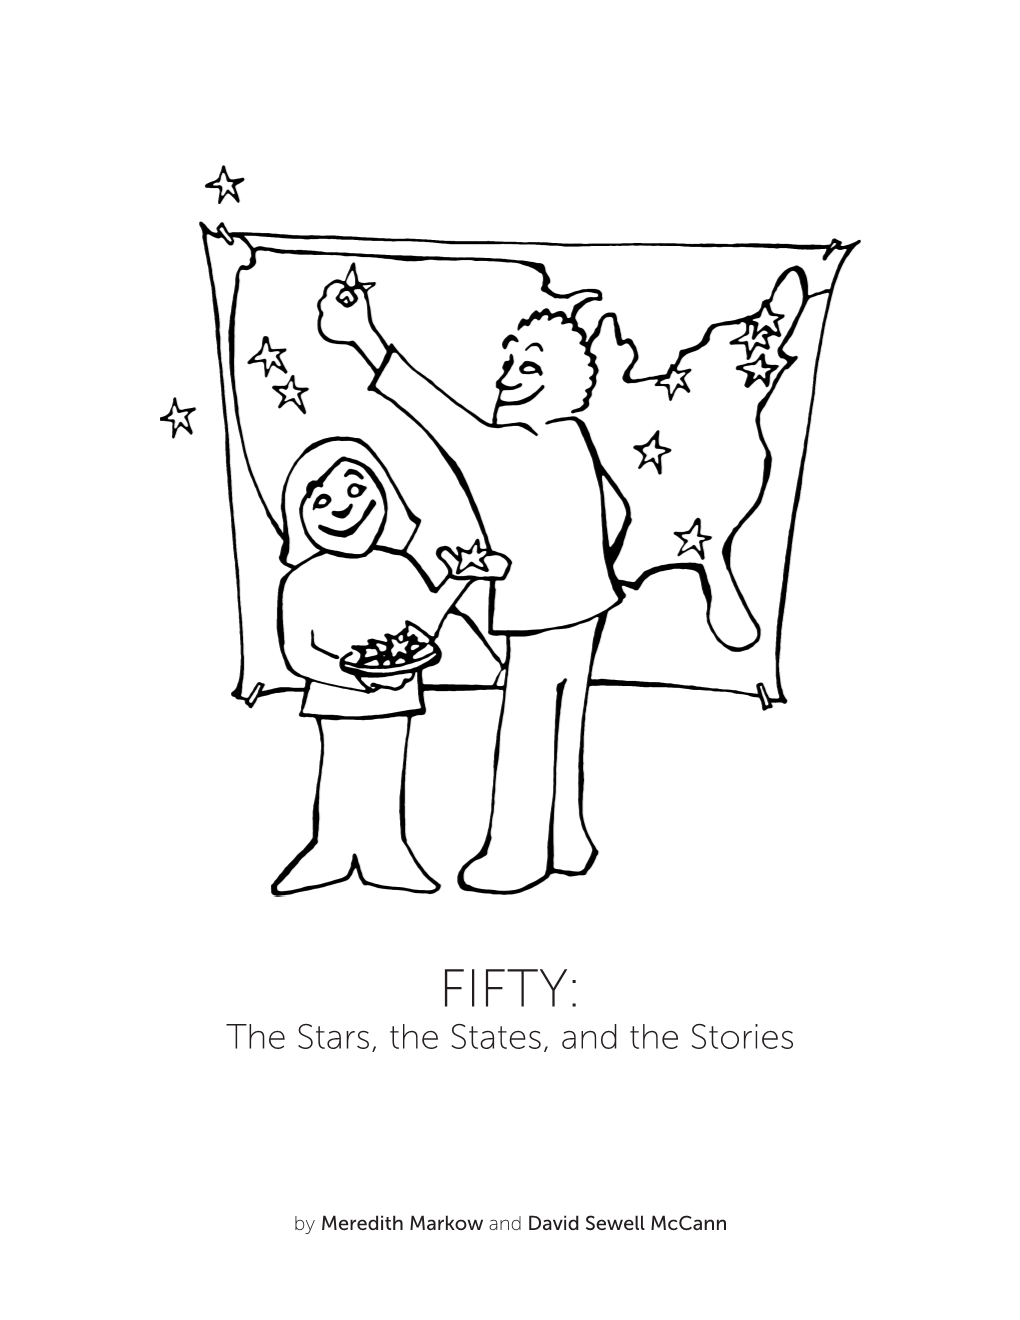 FIFTY: the Stars, the States, and the Stories